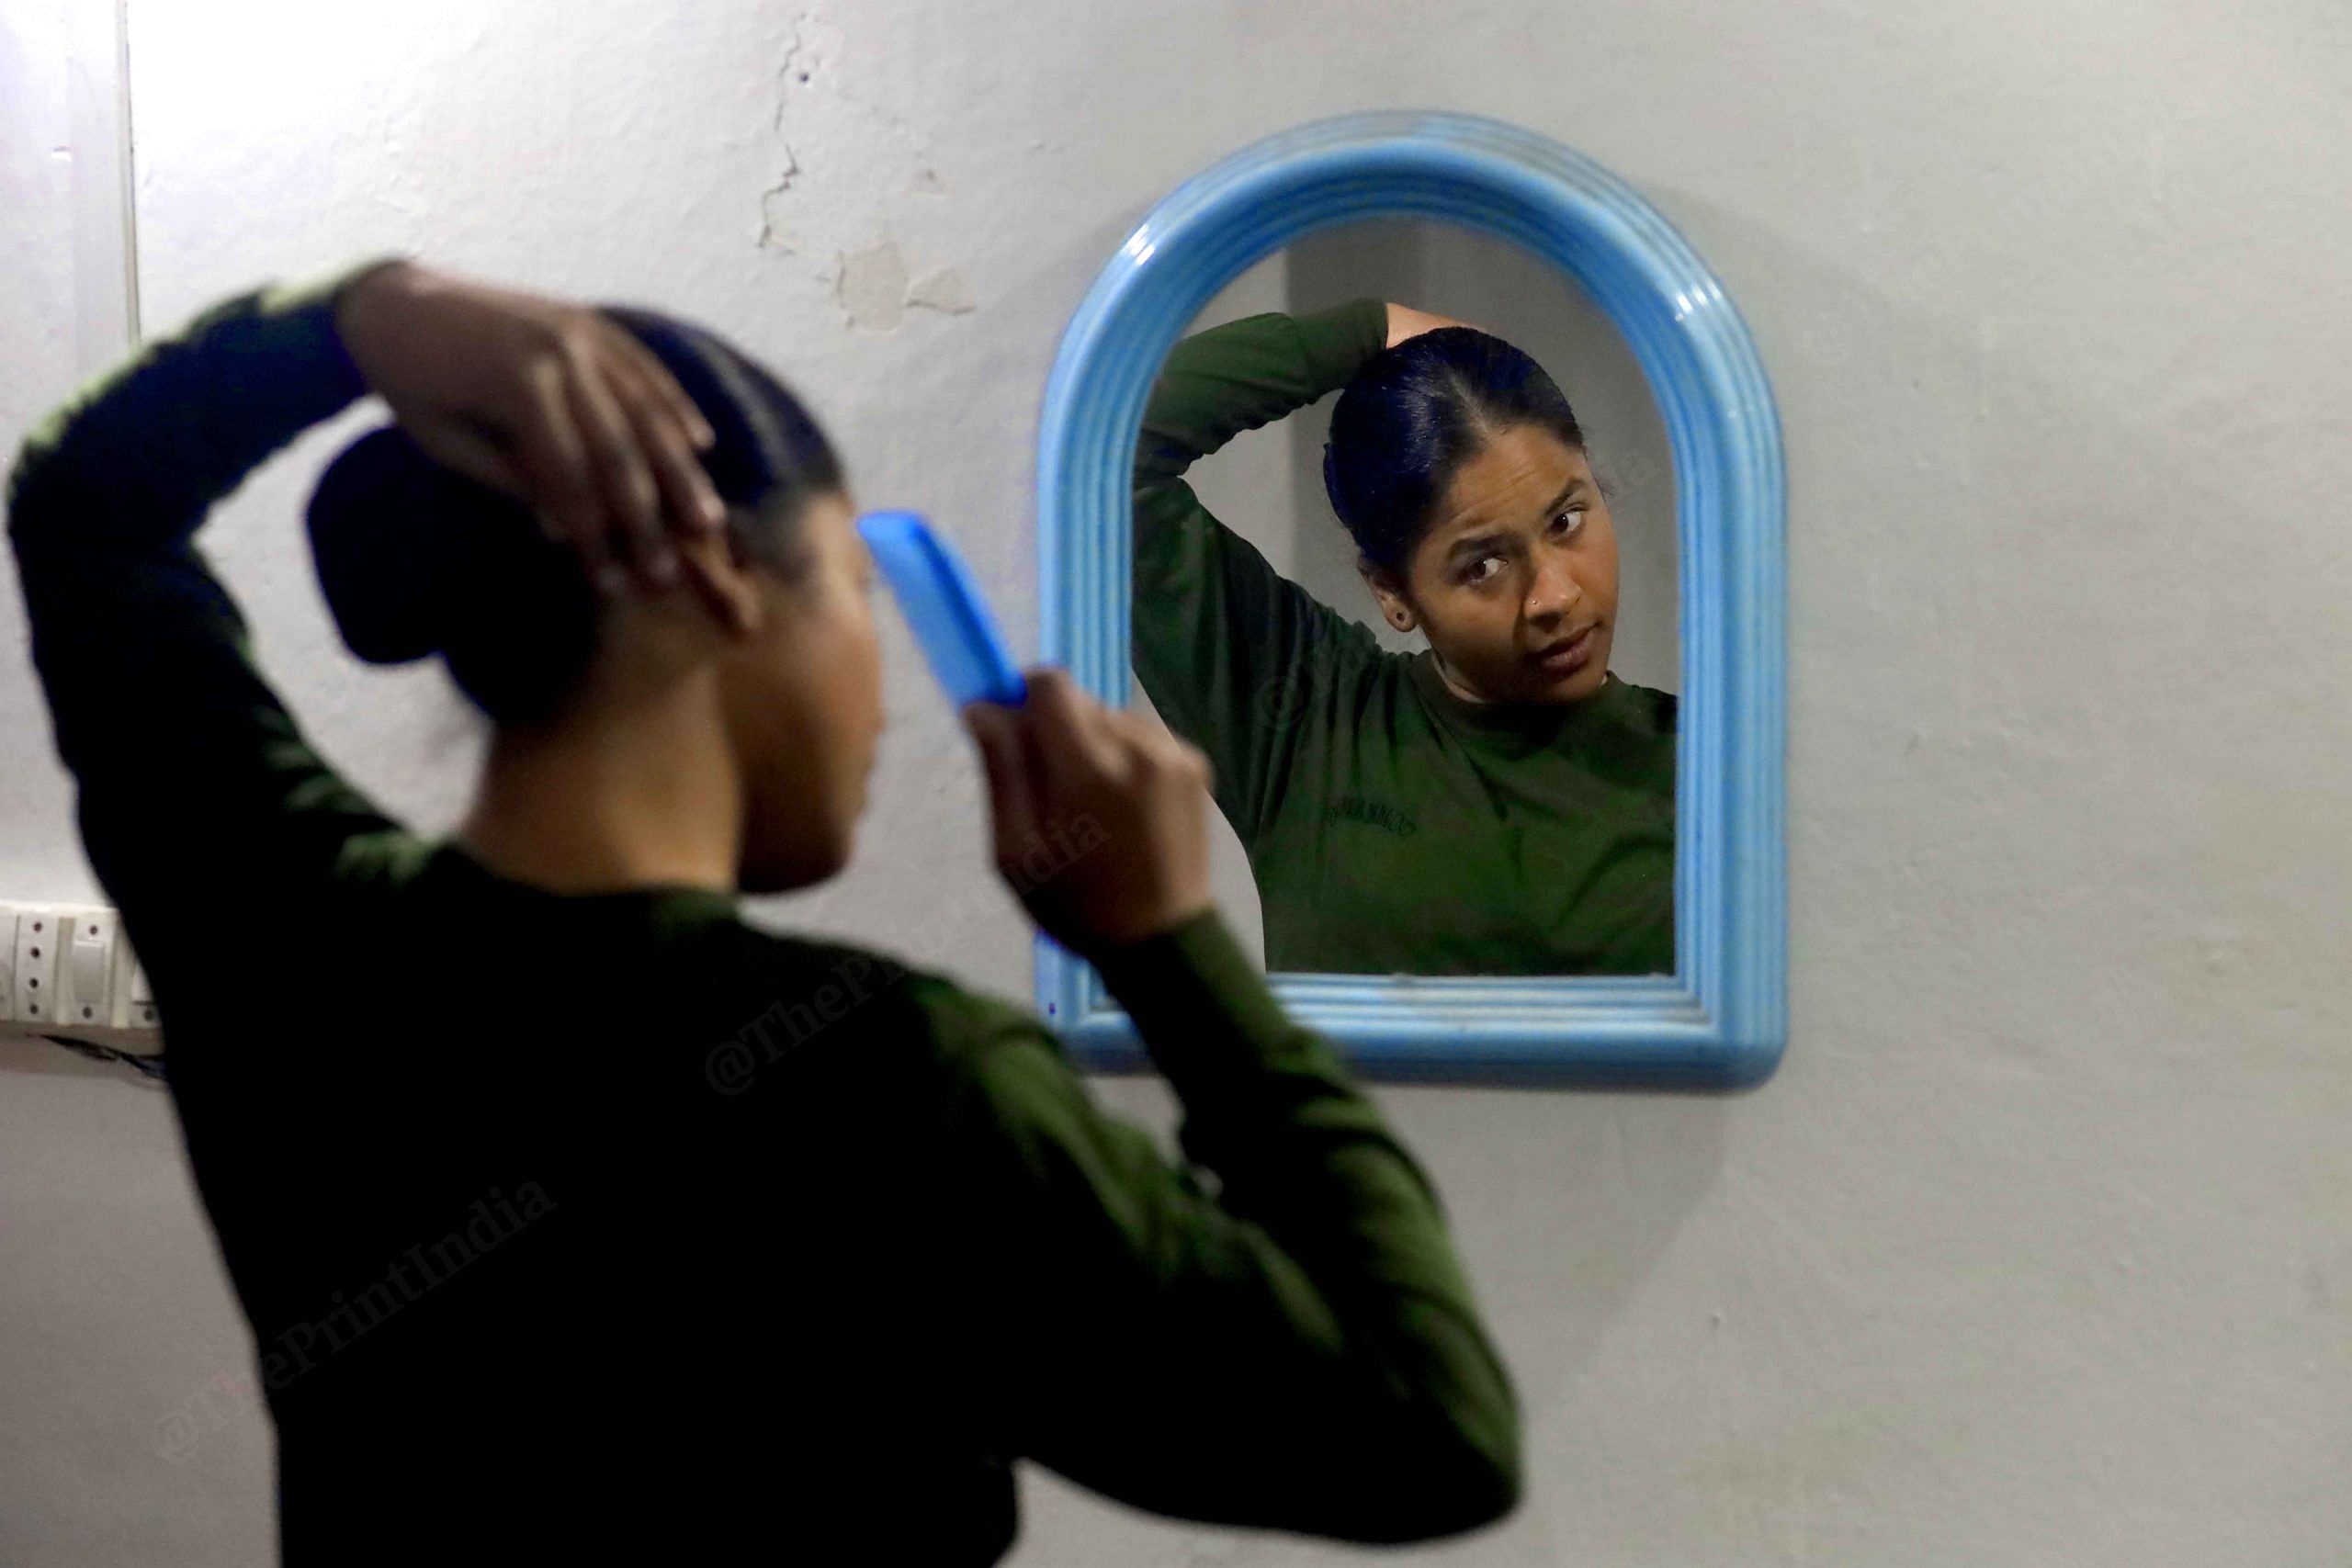 A woman CRPF jawan prepares for an assignment. These women strike a delicate balance every day — playing daughter, wife, mother, and a jawan. It is the confidence with which they perform these roles that makes this a special click for me | Photo: Manisha Mondal | ThePrint